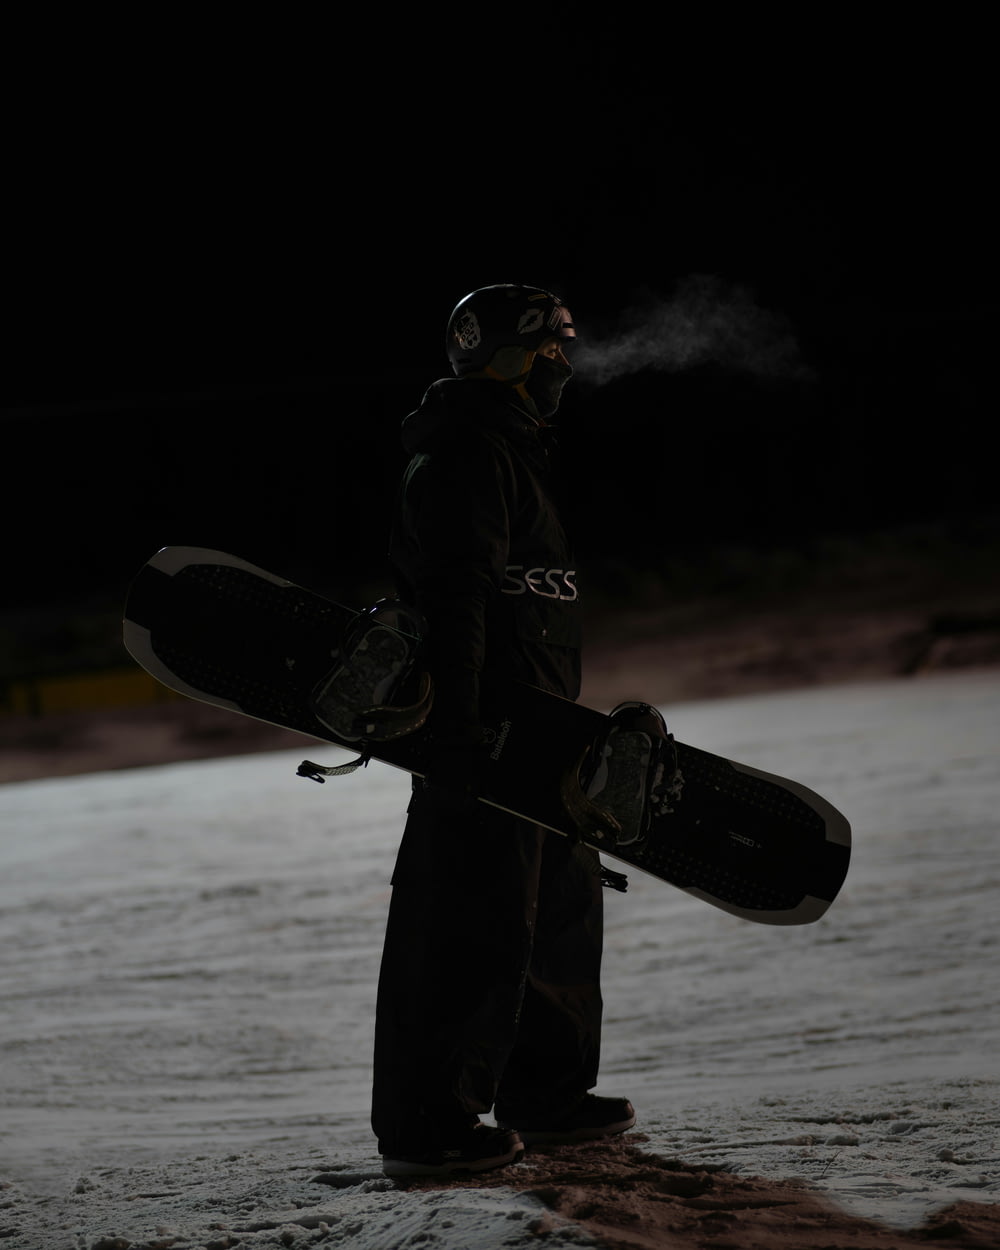 a man standing in the snow holding a snowboard